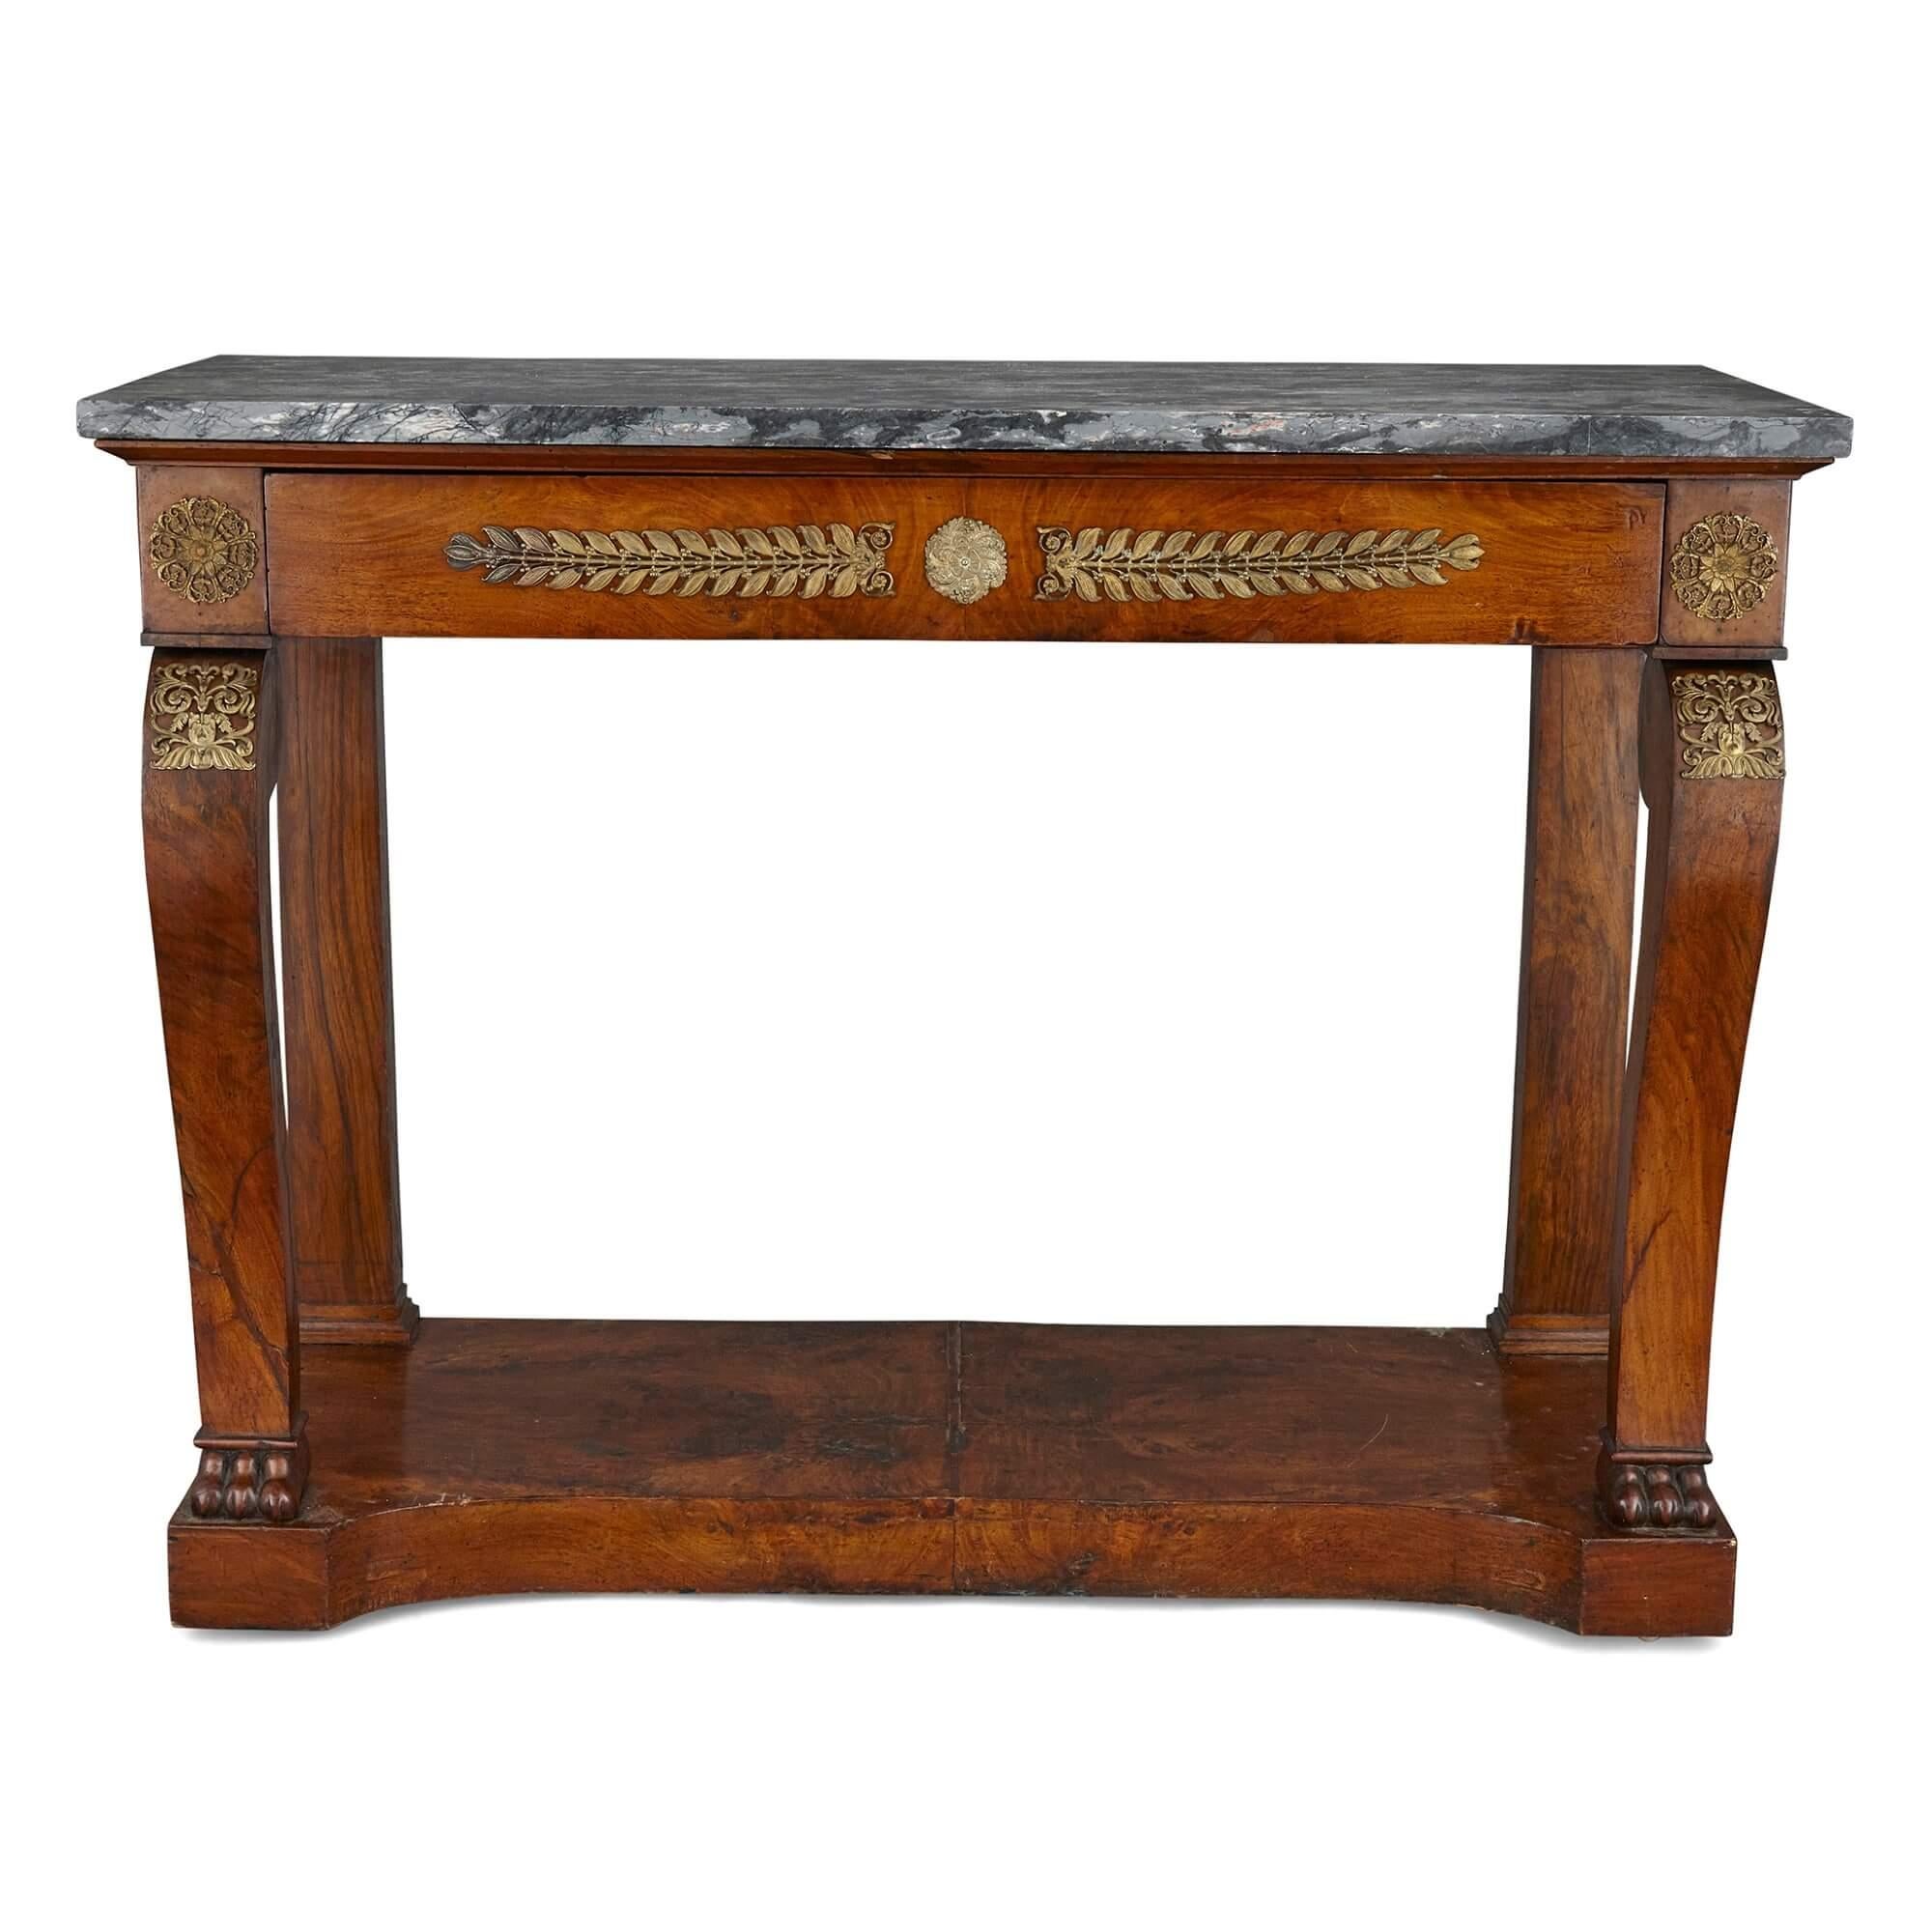 French Empire gilt bronze and mahogany console table
French, early 19th Century
Height 92cm, width 120cm, depth 51cm

This elegant console table is a superb example of French Empire period design. The console table features a veined grey marble